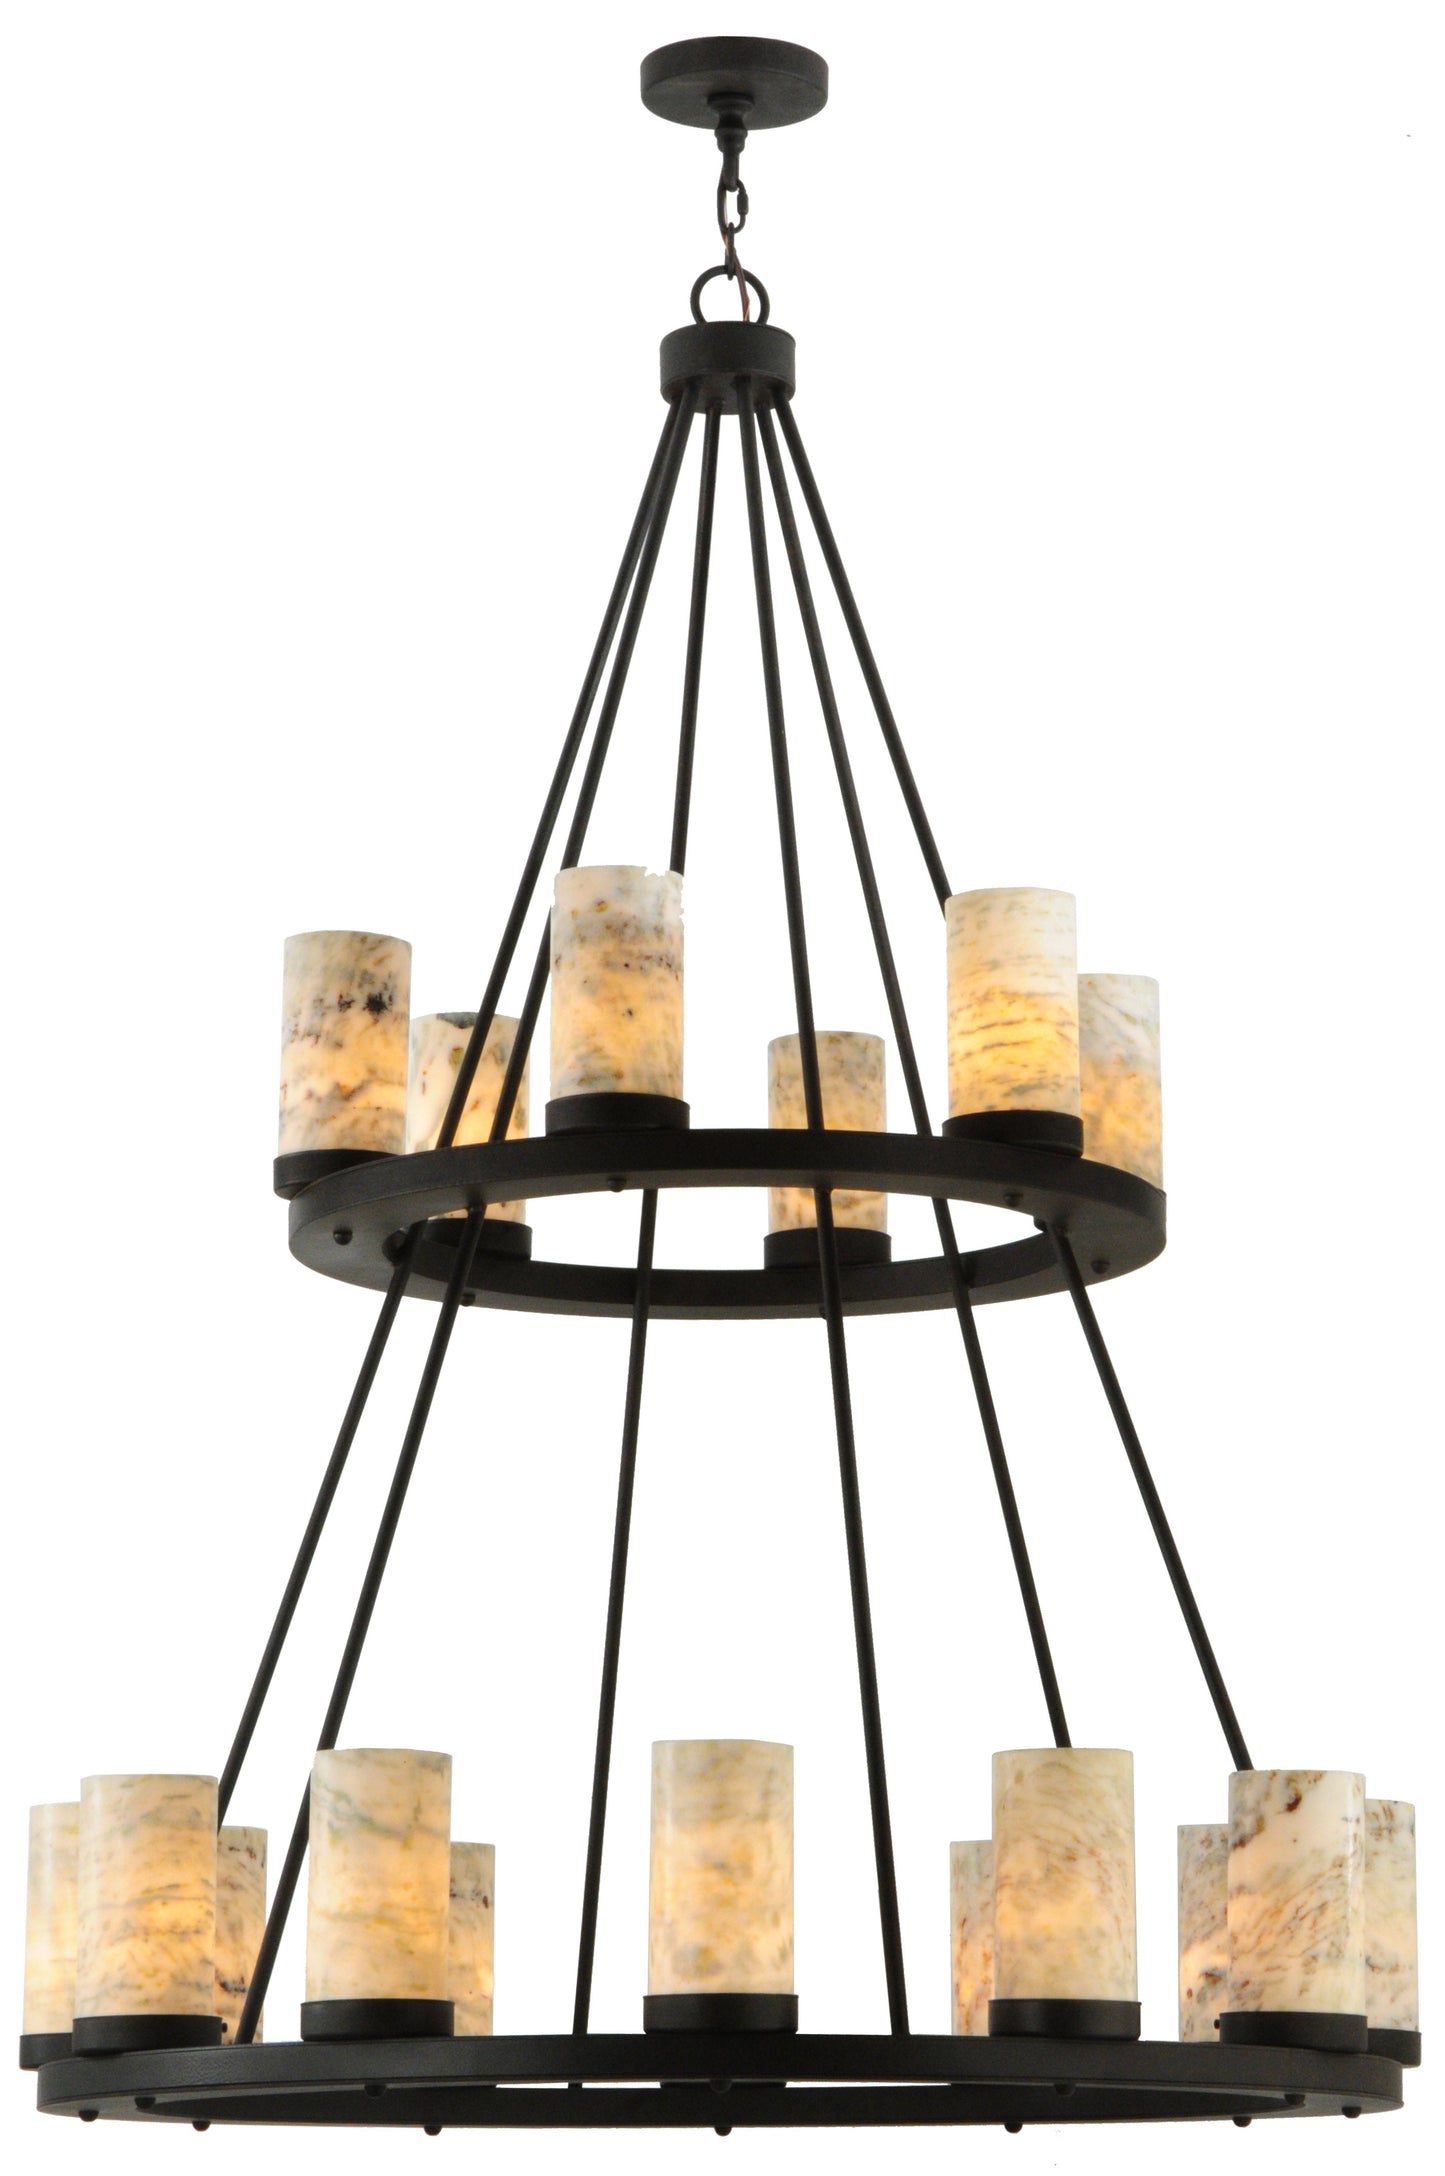 42" Loxley Jadestone 18-Light Two Tier Chandelier by 2nd Ave Lighting